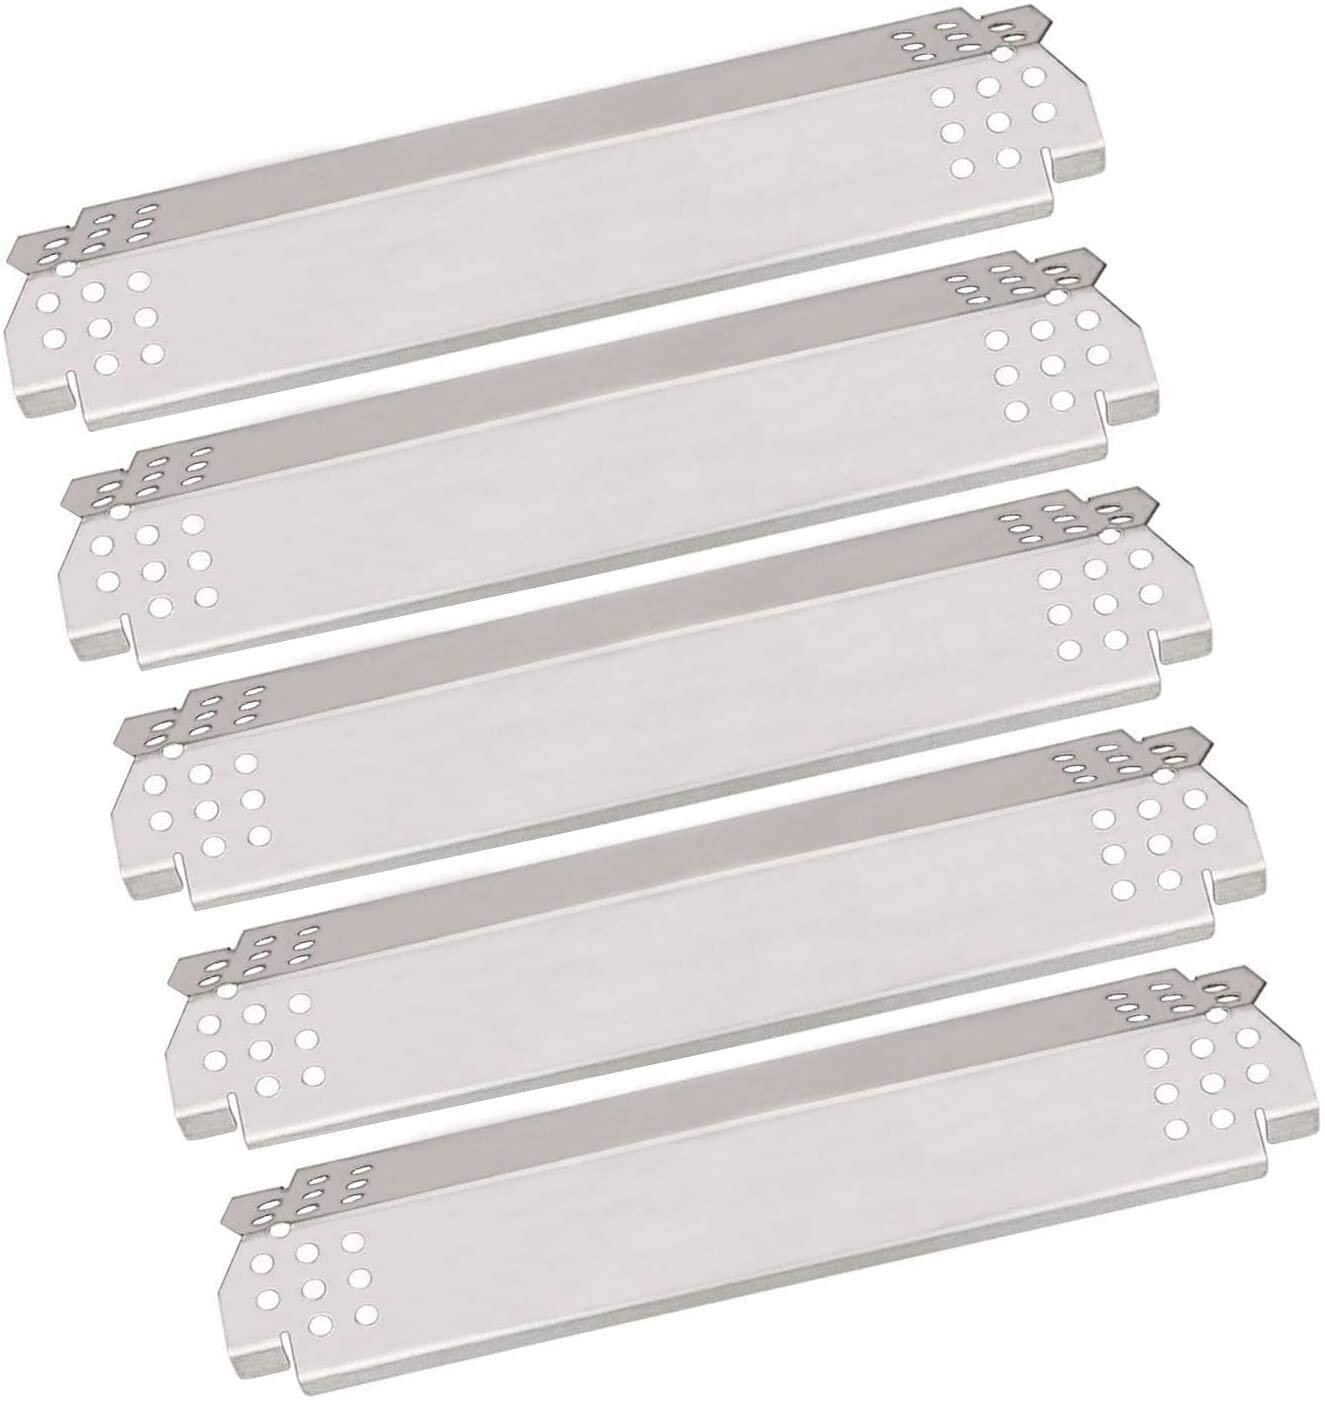 Details about   Heat Plates Cooking Grates For Home Depot Nexgrill 720-0830H 720-0888 720-0888N 